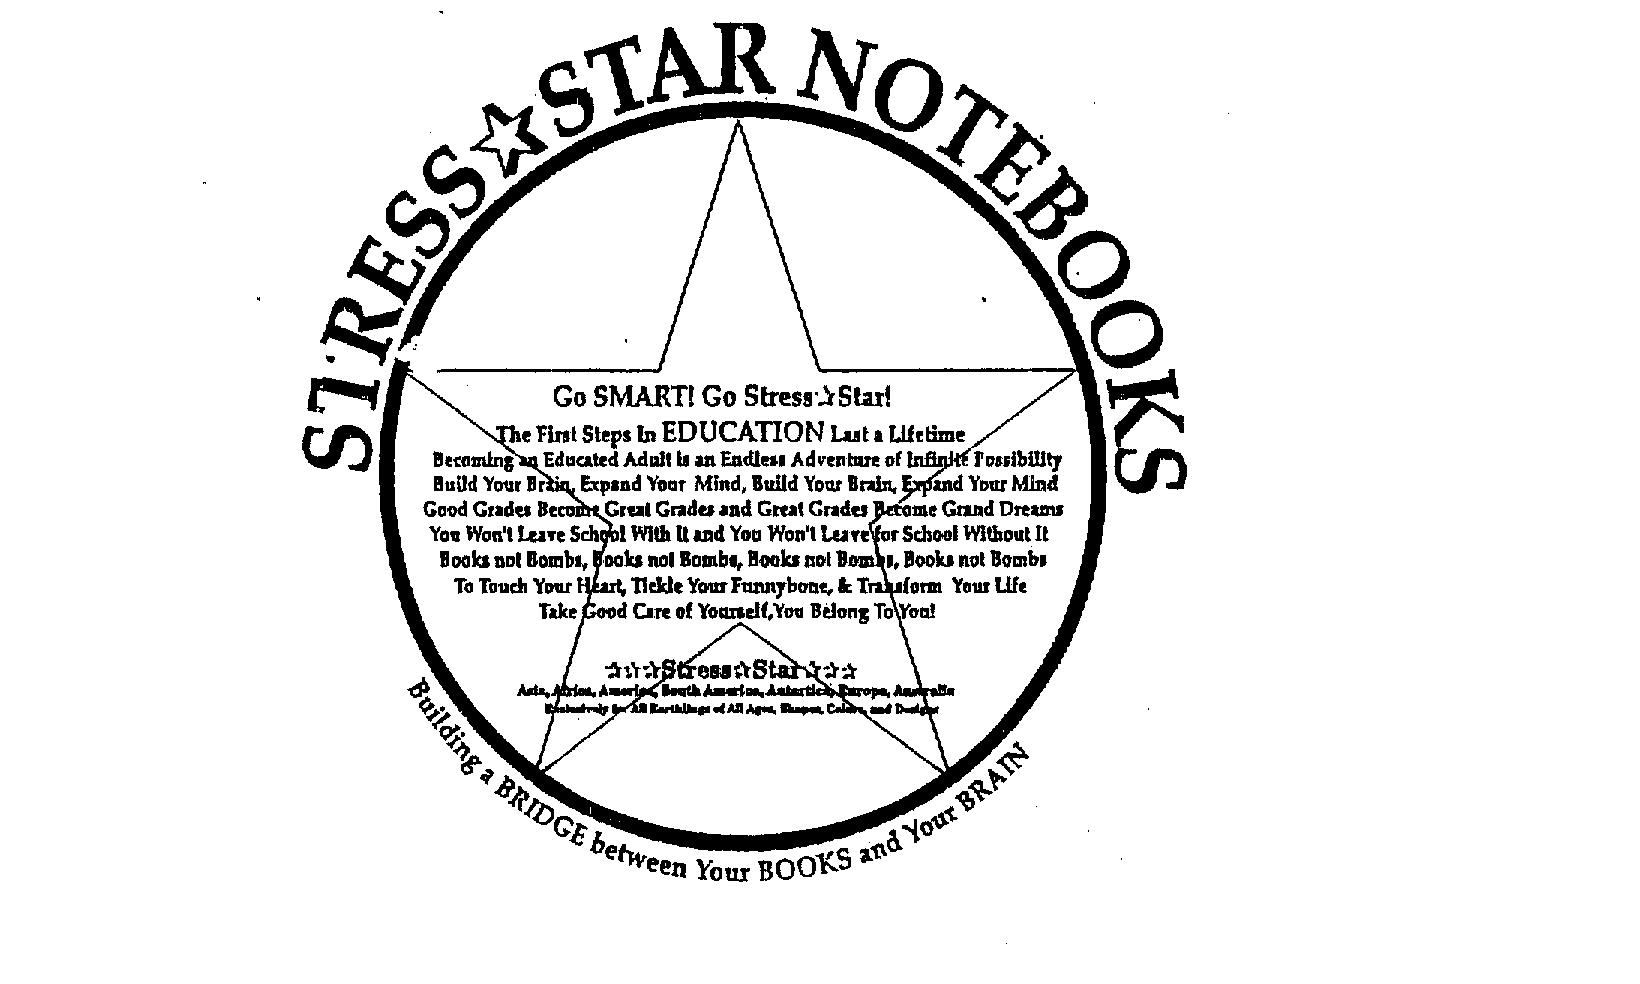 Trademark Logo STRESS STAR NOTEBOOKS BUILDING A BRIDGE BETWEEN YOUR BOOKS AND YOUR BRAIN